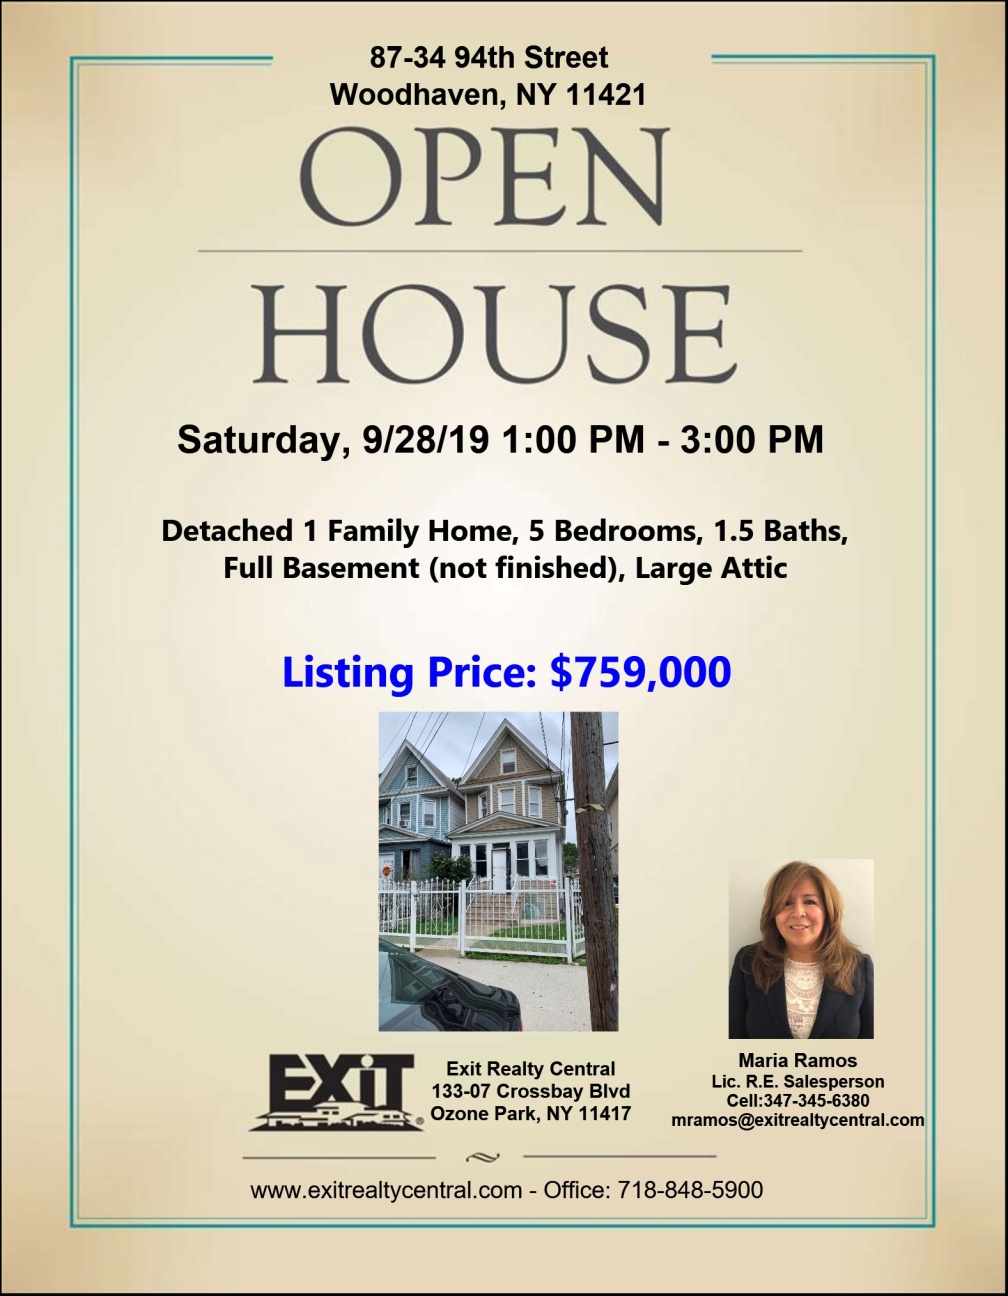 Open House in Woodhaven Saturday, 9/28 1-3pm